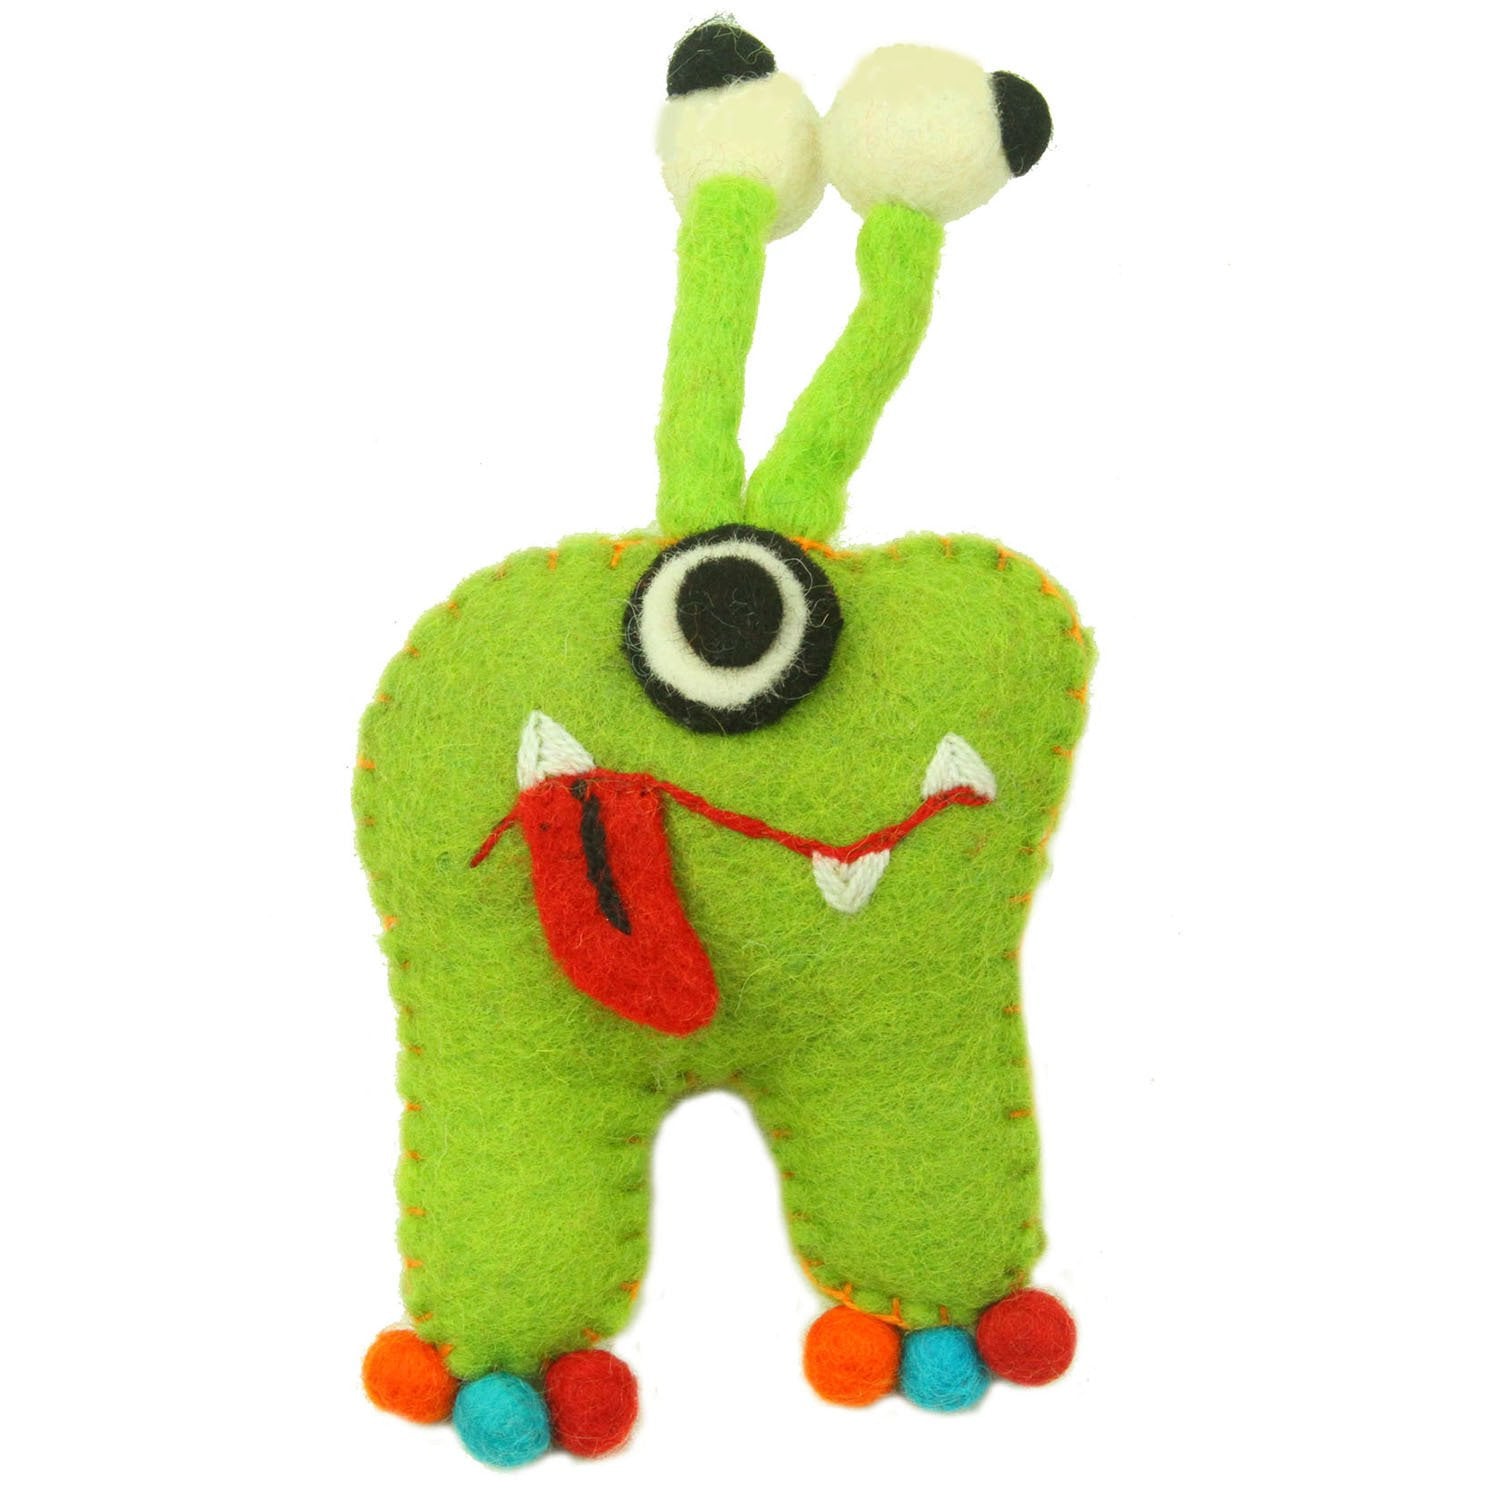 This Global Groove Life, handmade, ethical, fair trade, eco-friendly, sustainable, green, tooth fairy monster,was created by artisans in Kathmandu Nepal and is adorned with an adorable flower motif.